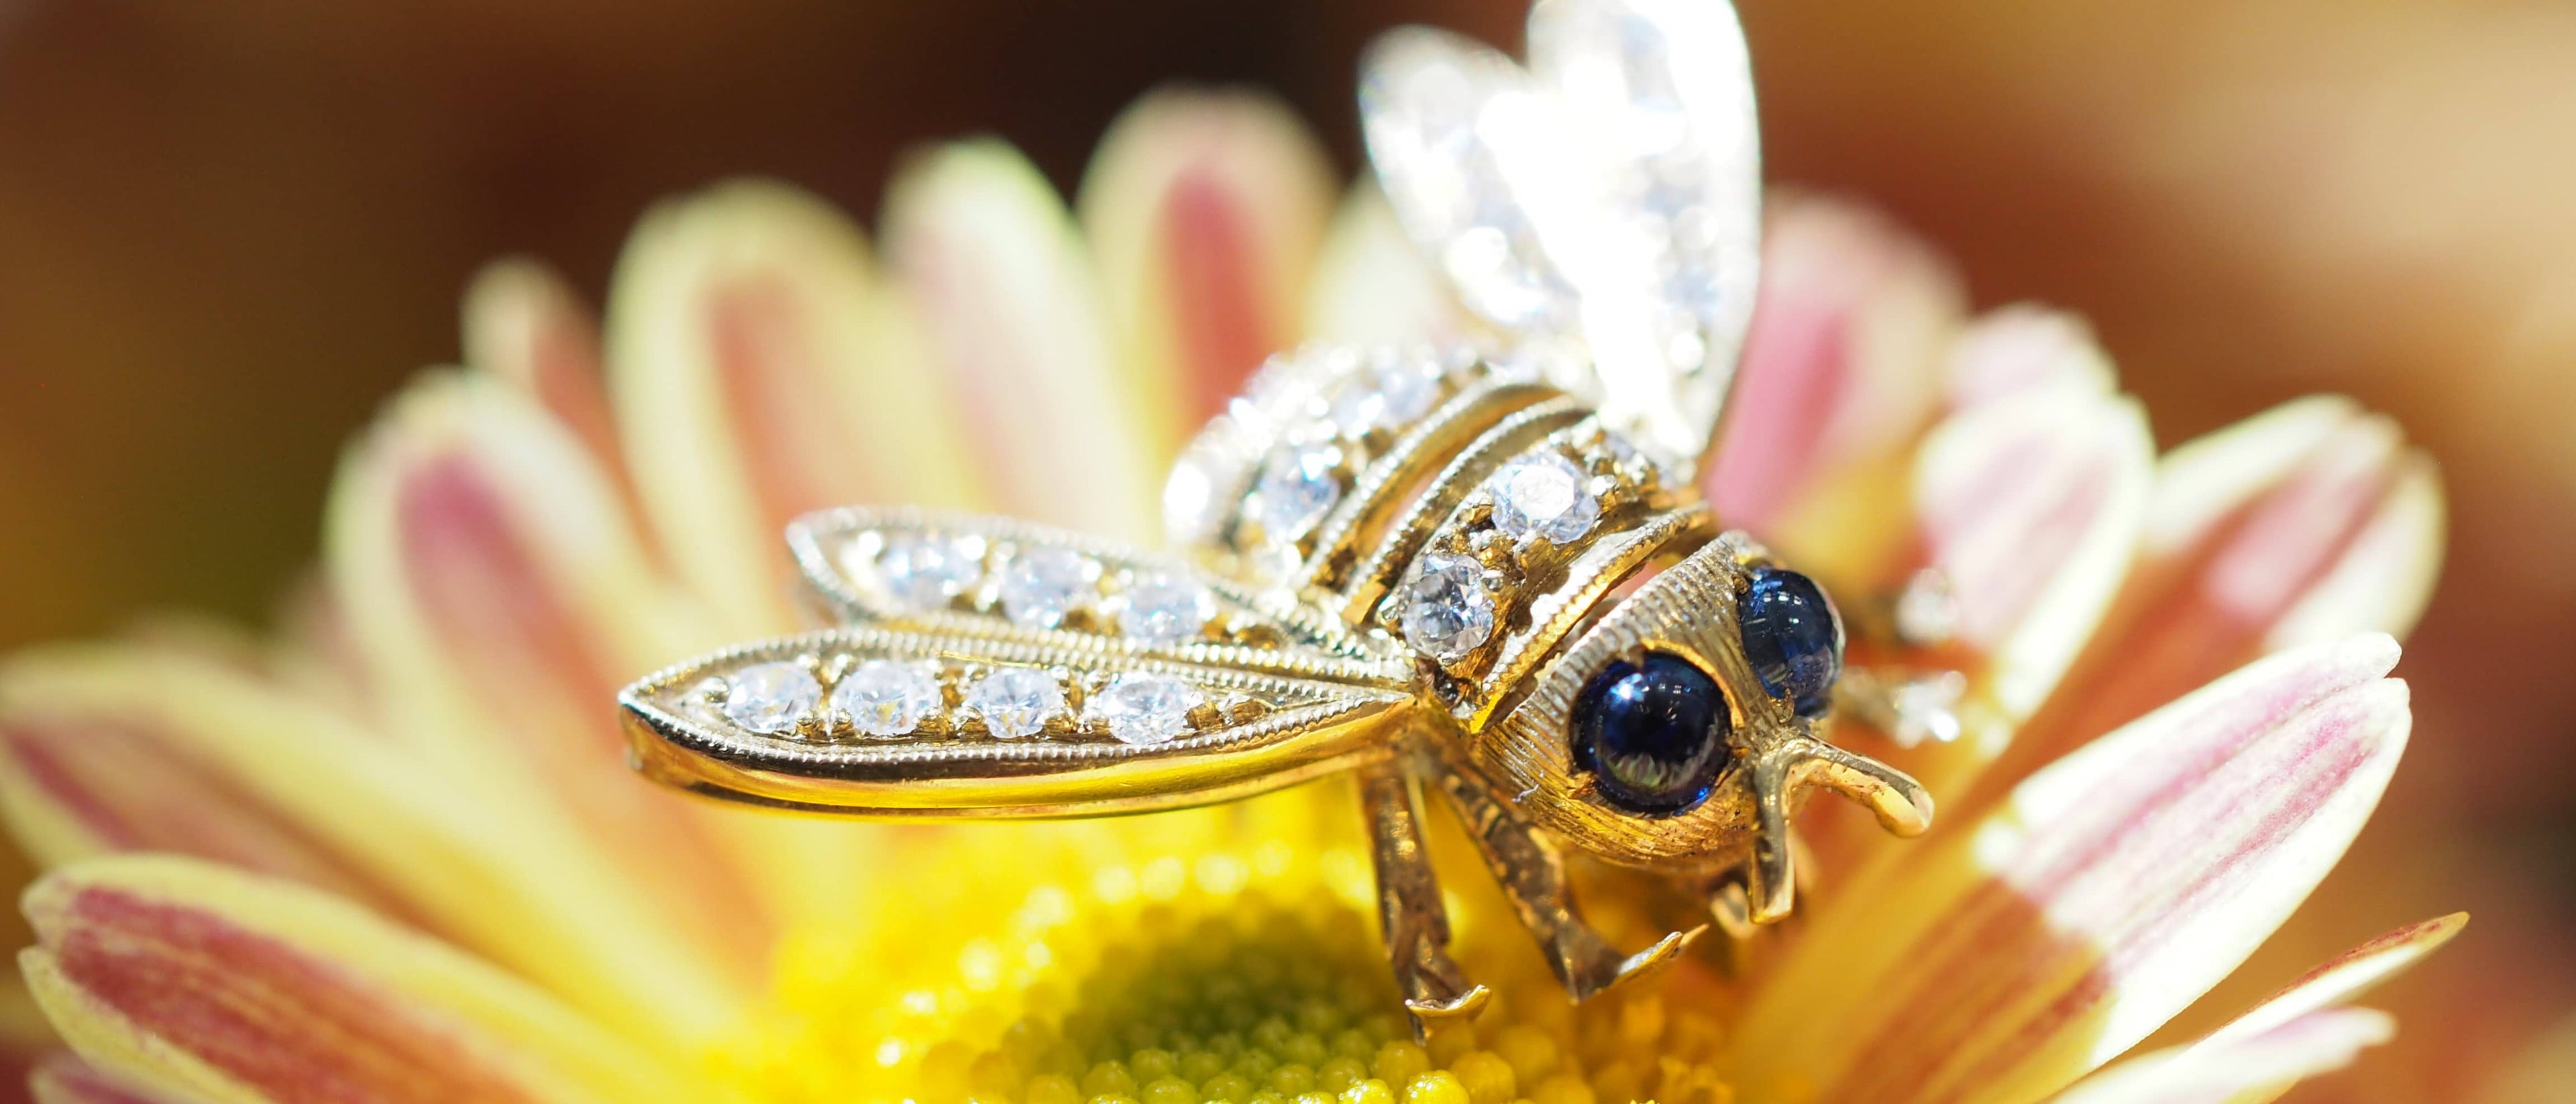 A bumblebee made of diamonds with round sapphires for eyes, on a real flower